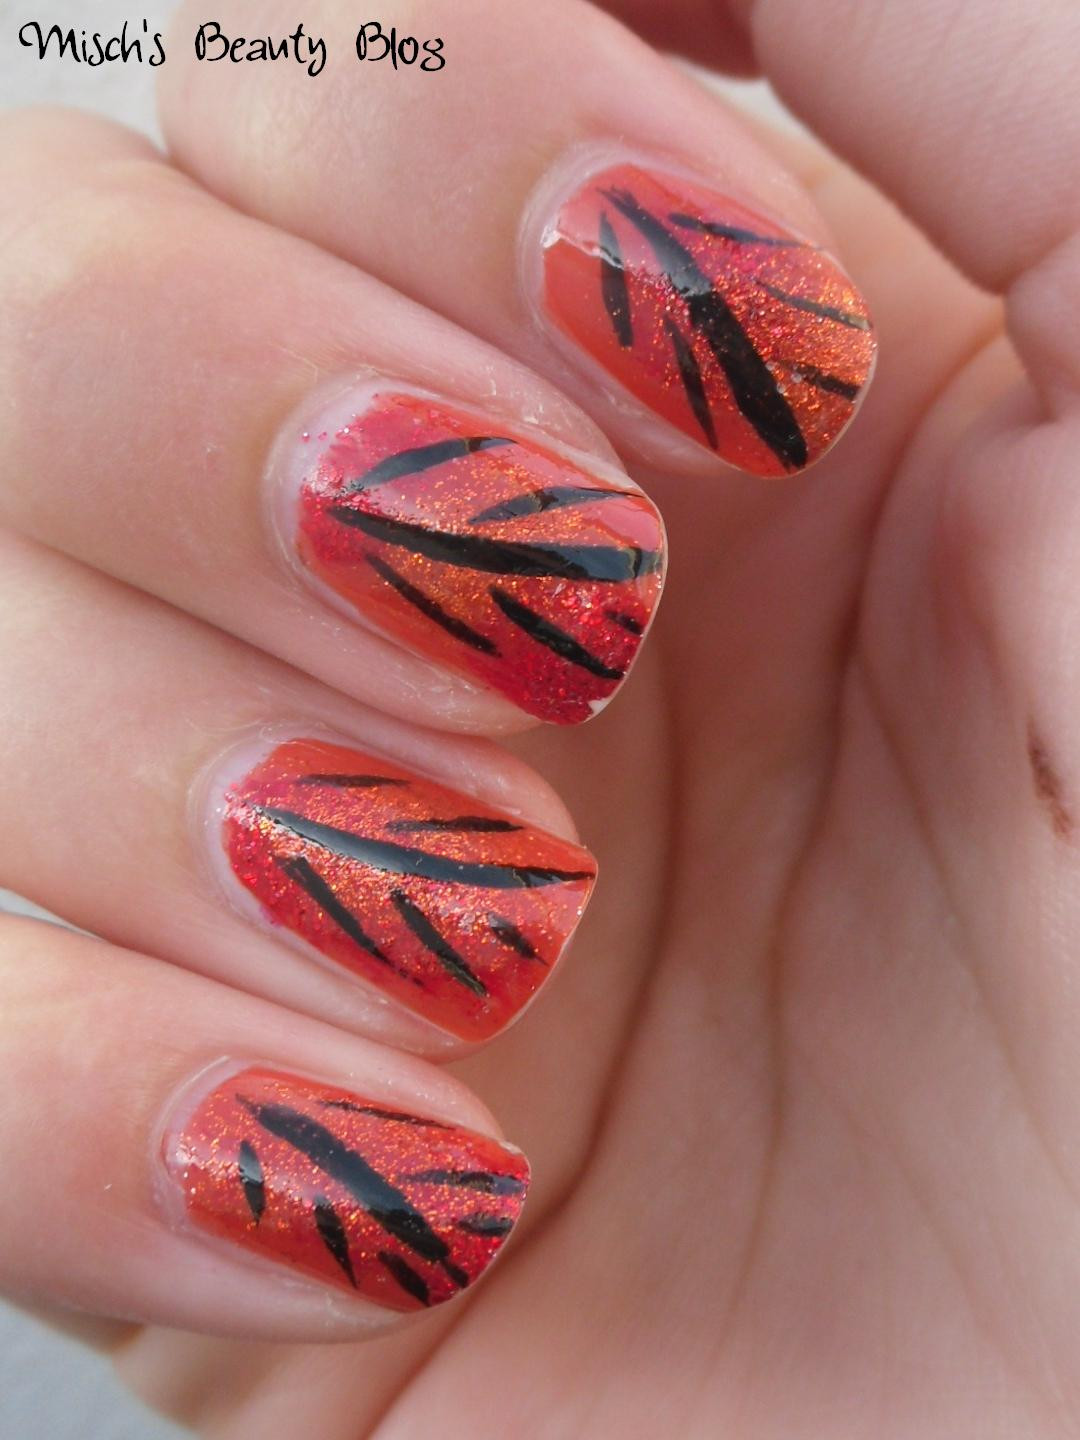 Fall Leaf Nail Designs
 Misch s Beauty Blog NOTD September 29th Fall Leaf Nail Art